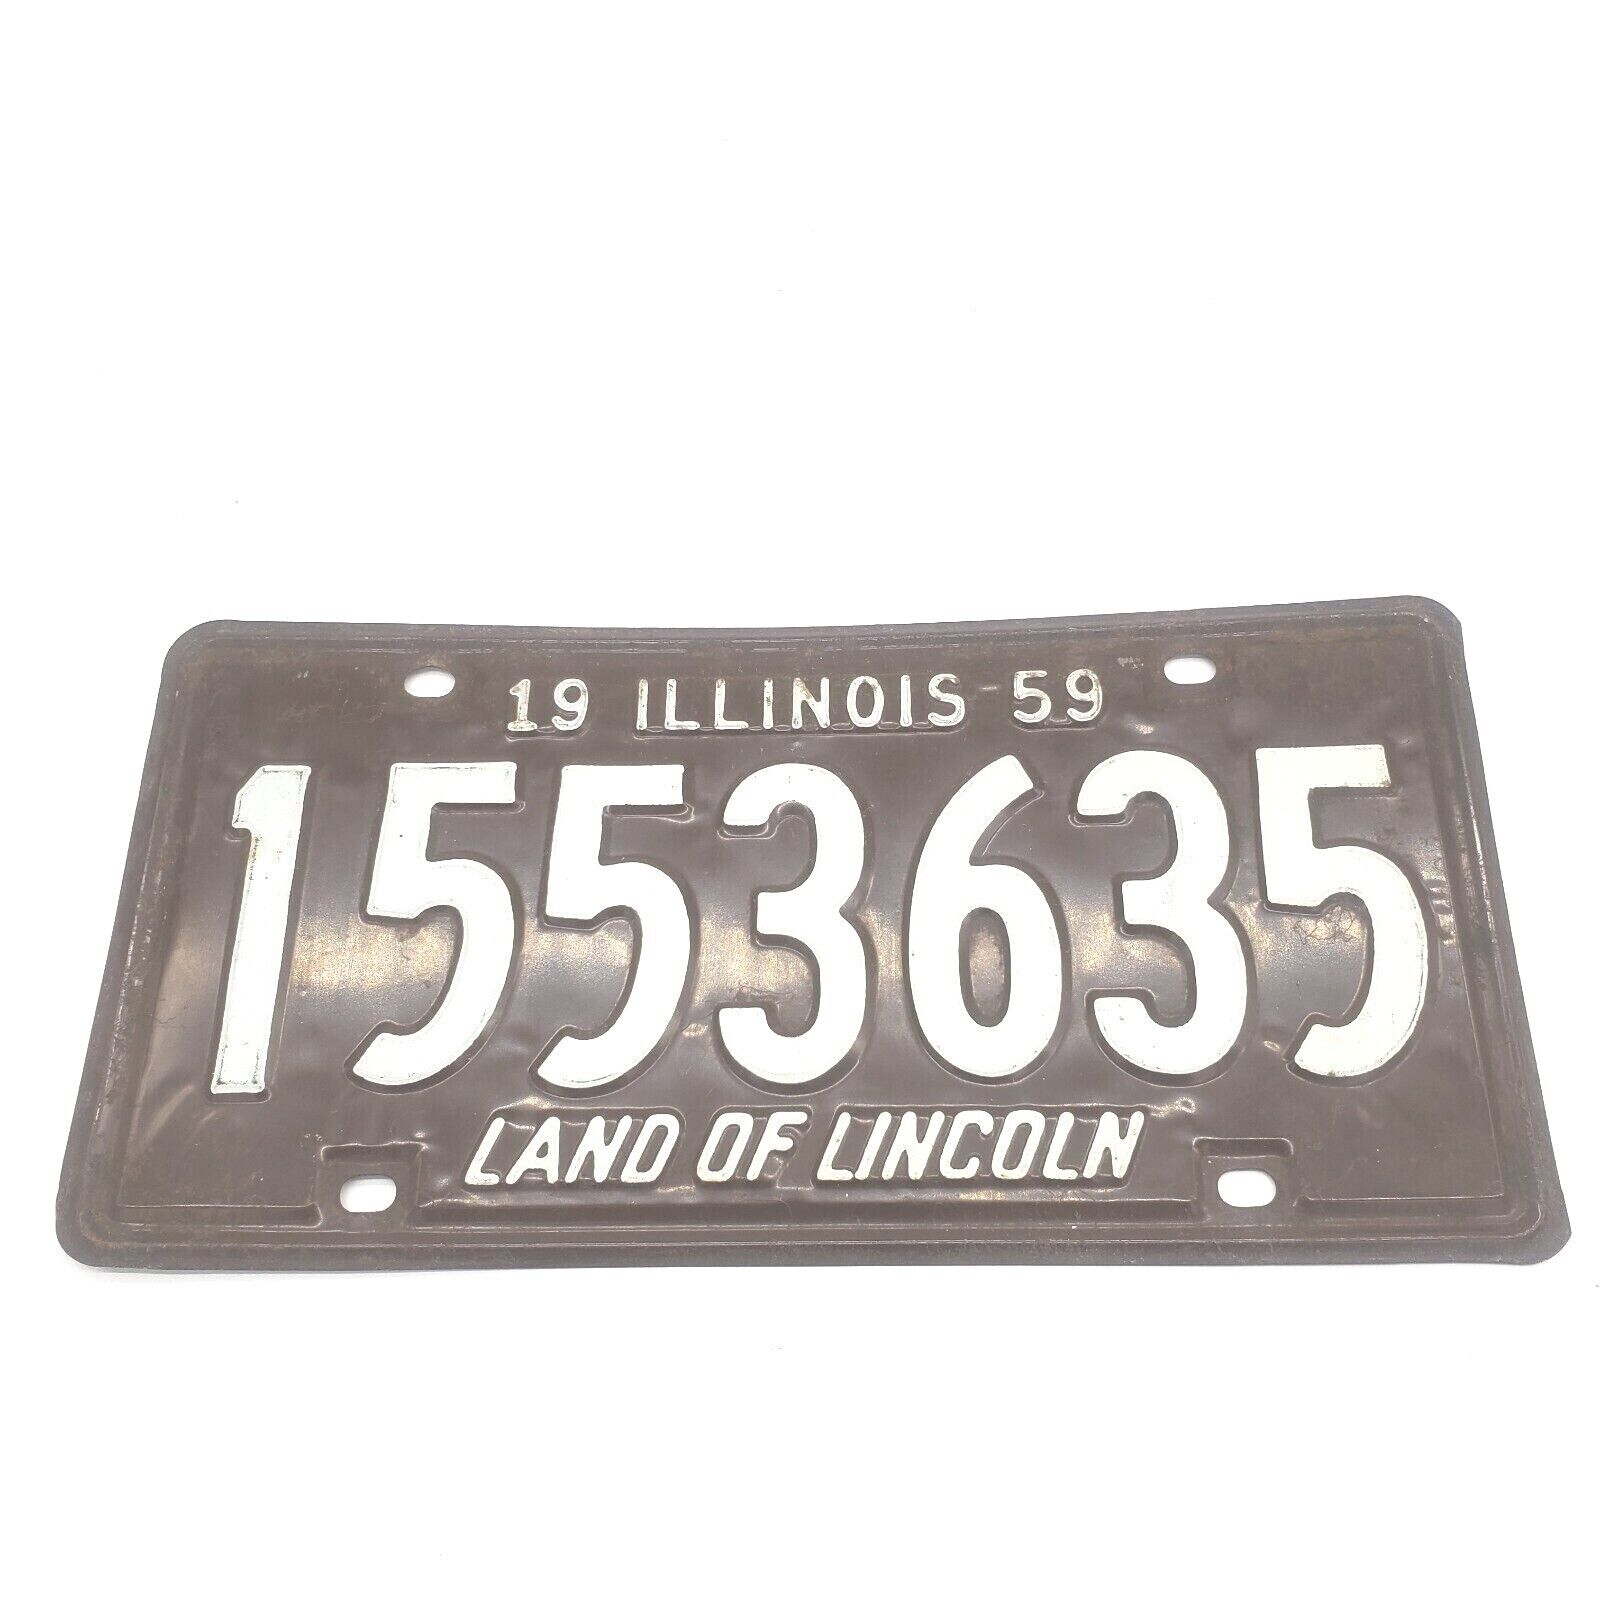  	Vintage 1959 illinois\'s license plate number 1553635 land of Lincoln